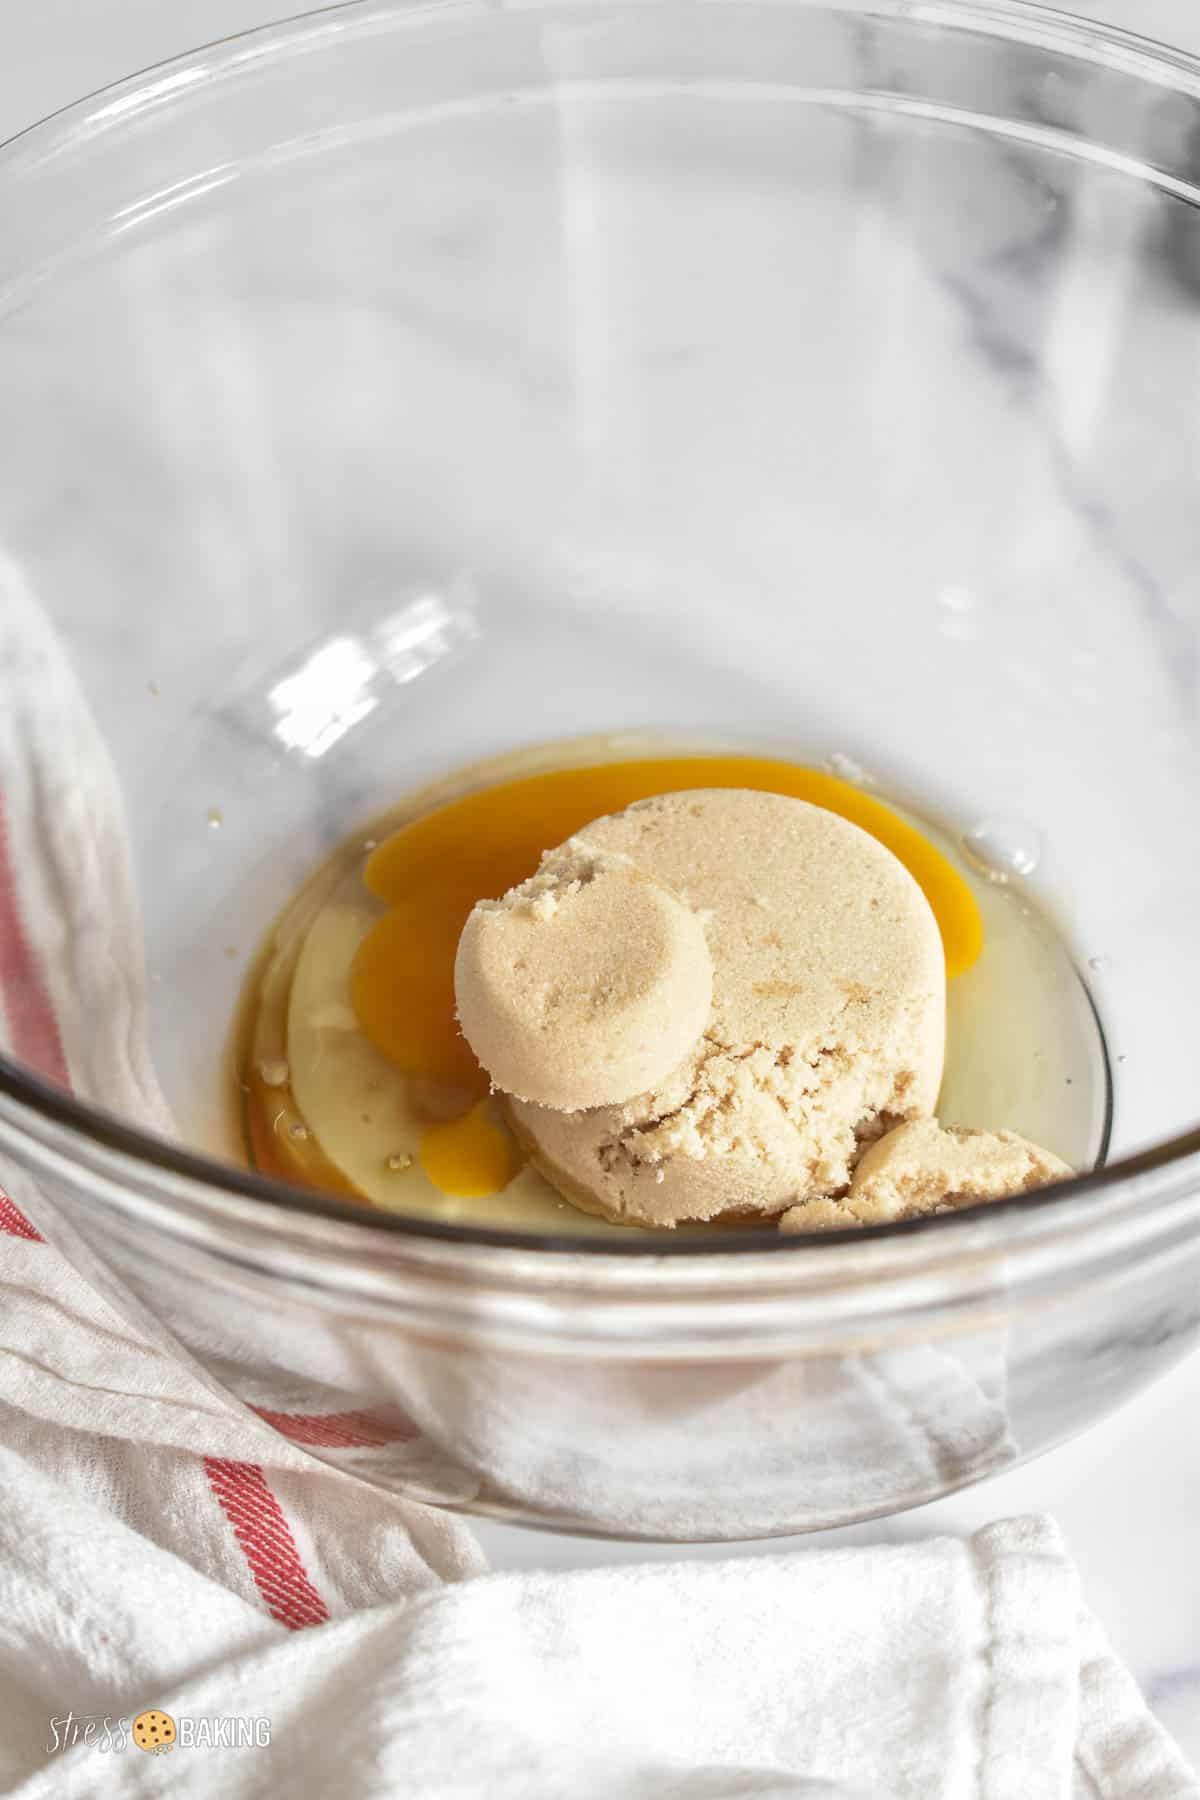 Light brown sugar and egg in a clear mixing bowl